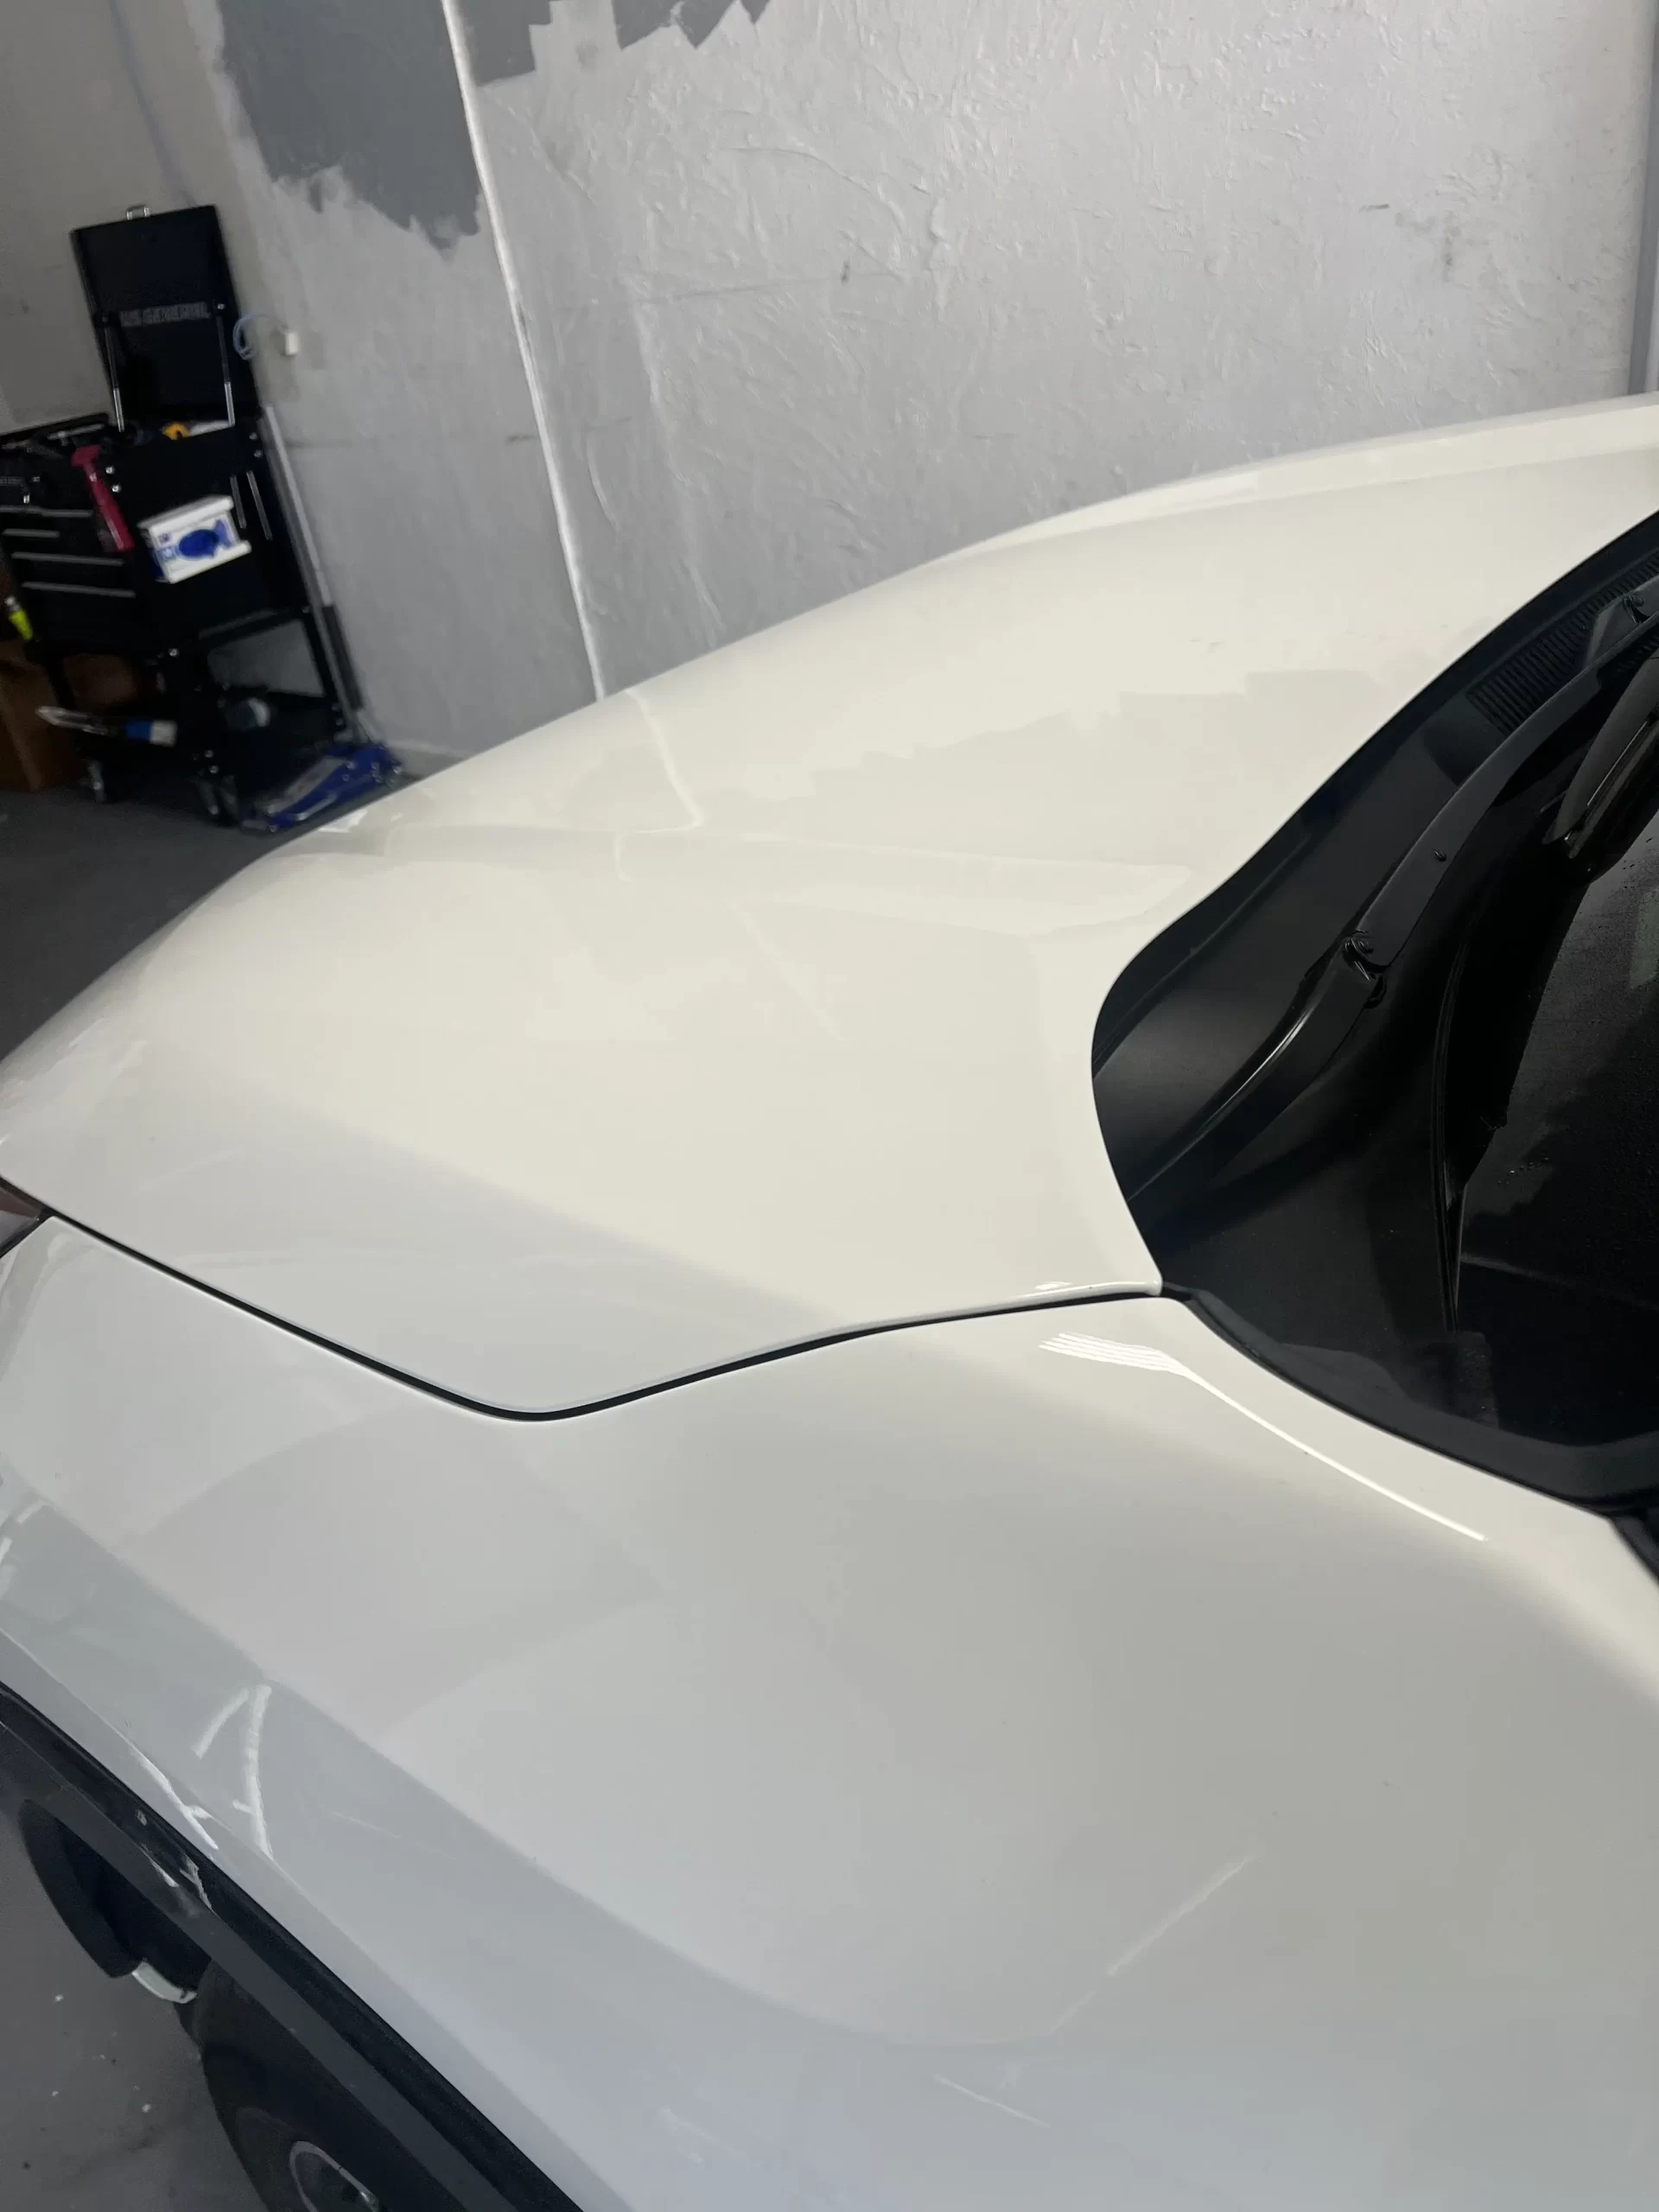 The repaired hood of a white vehicle inside a white-walled garage.